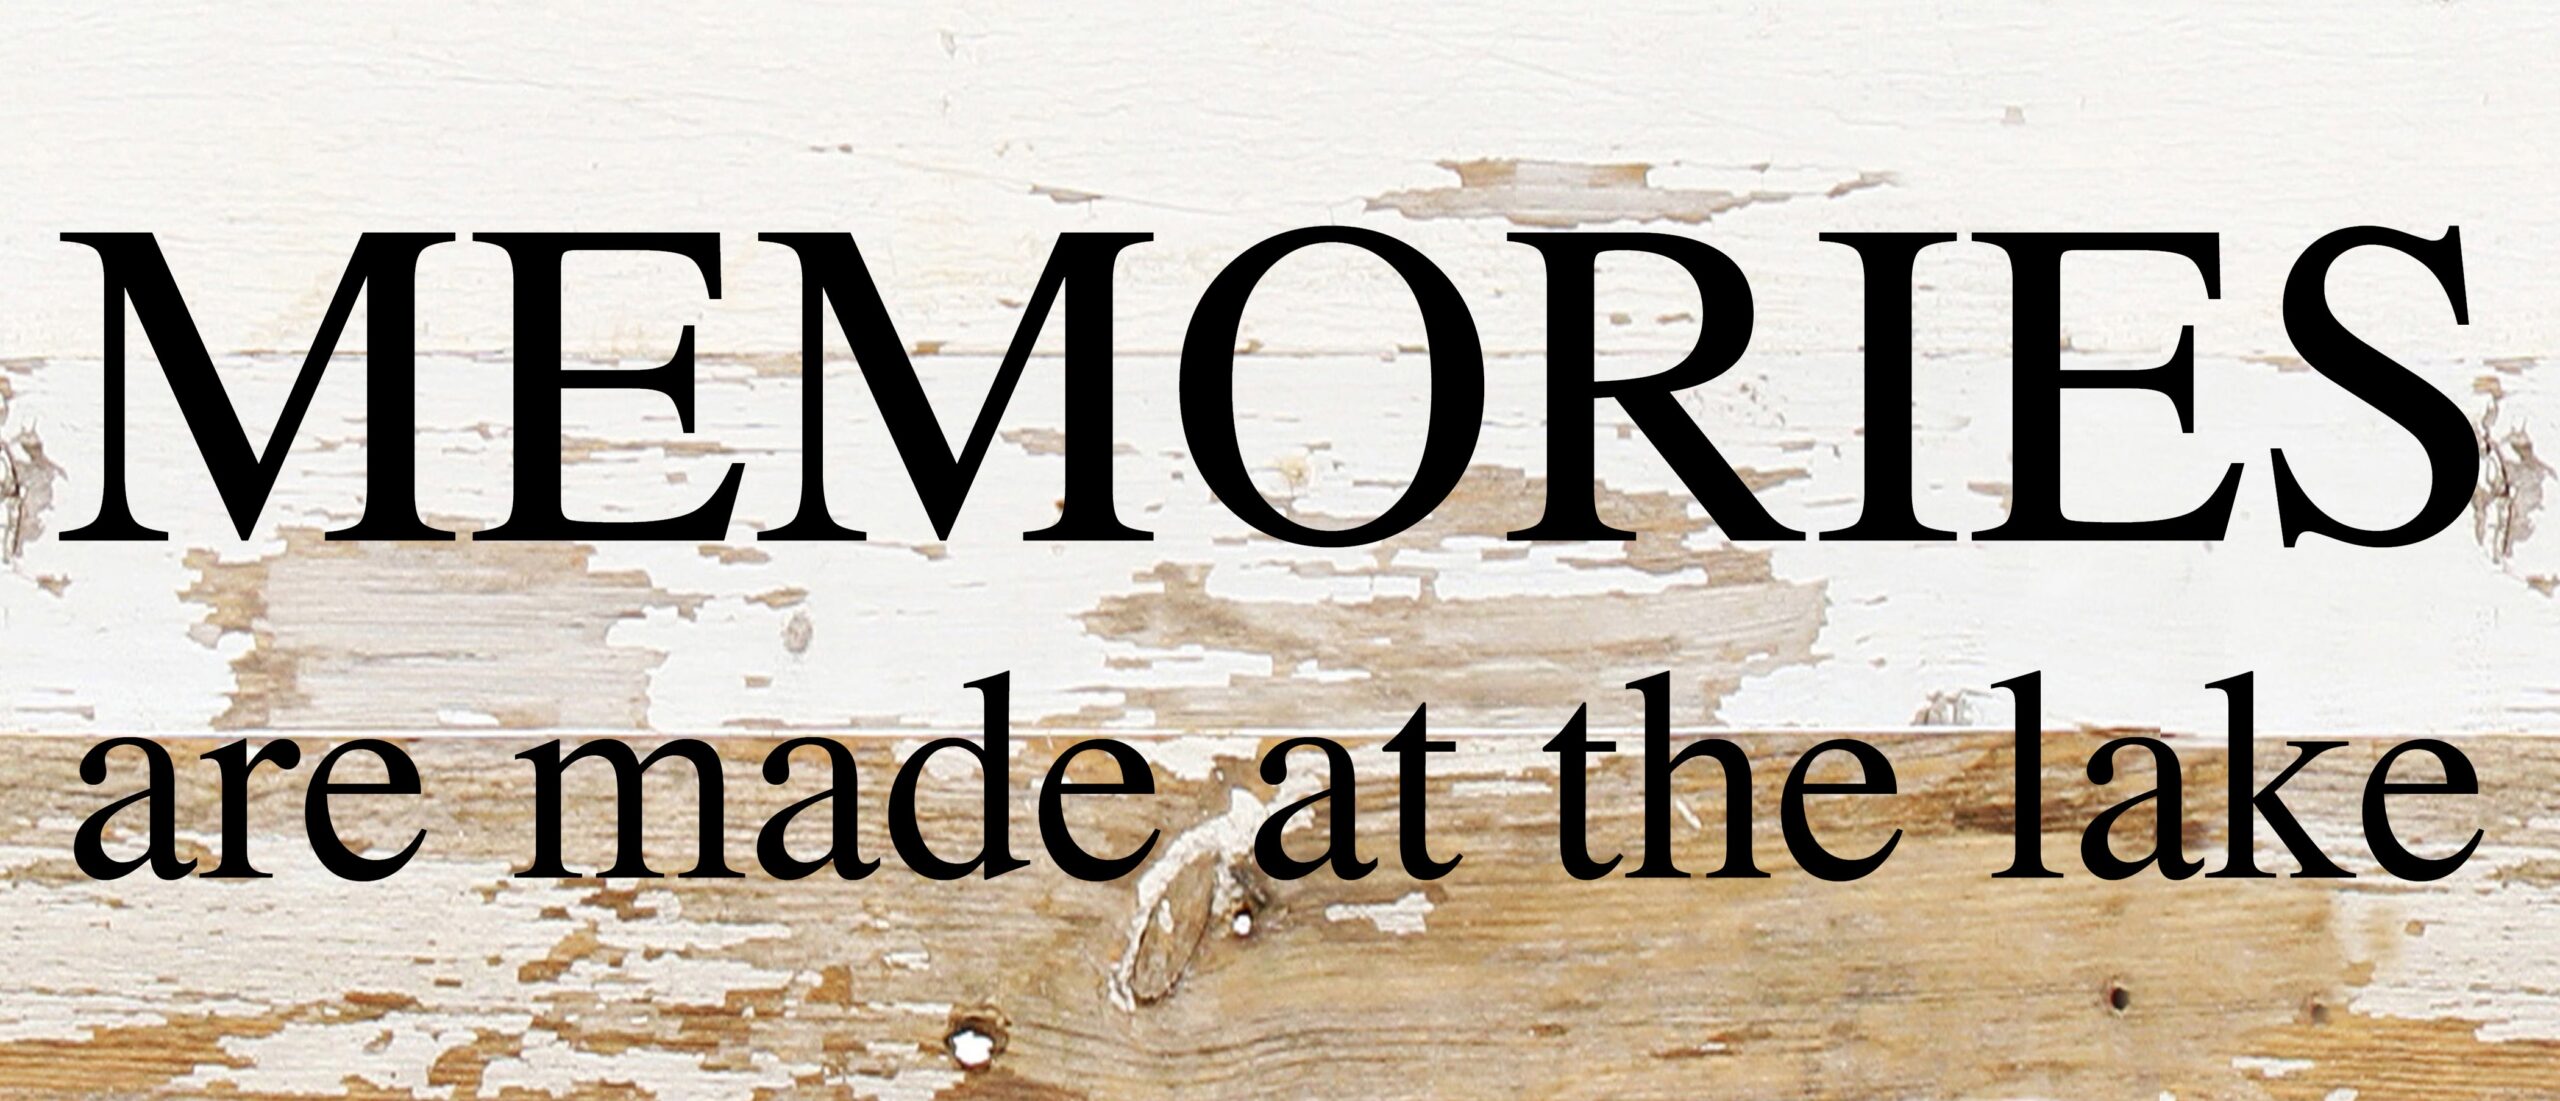 Memories are made at the lake. / 14"x6" Reclaimed Wood Sign